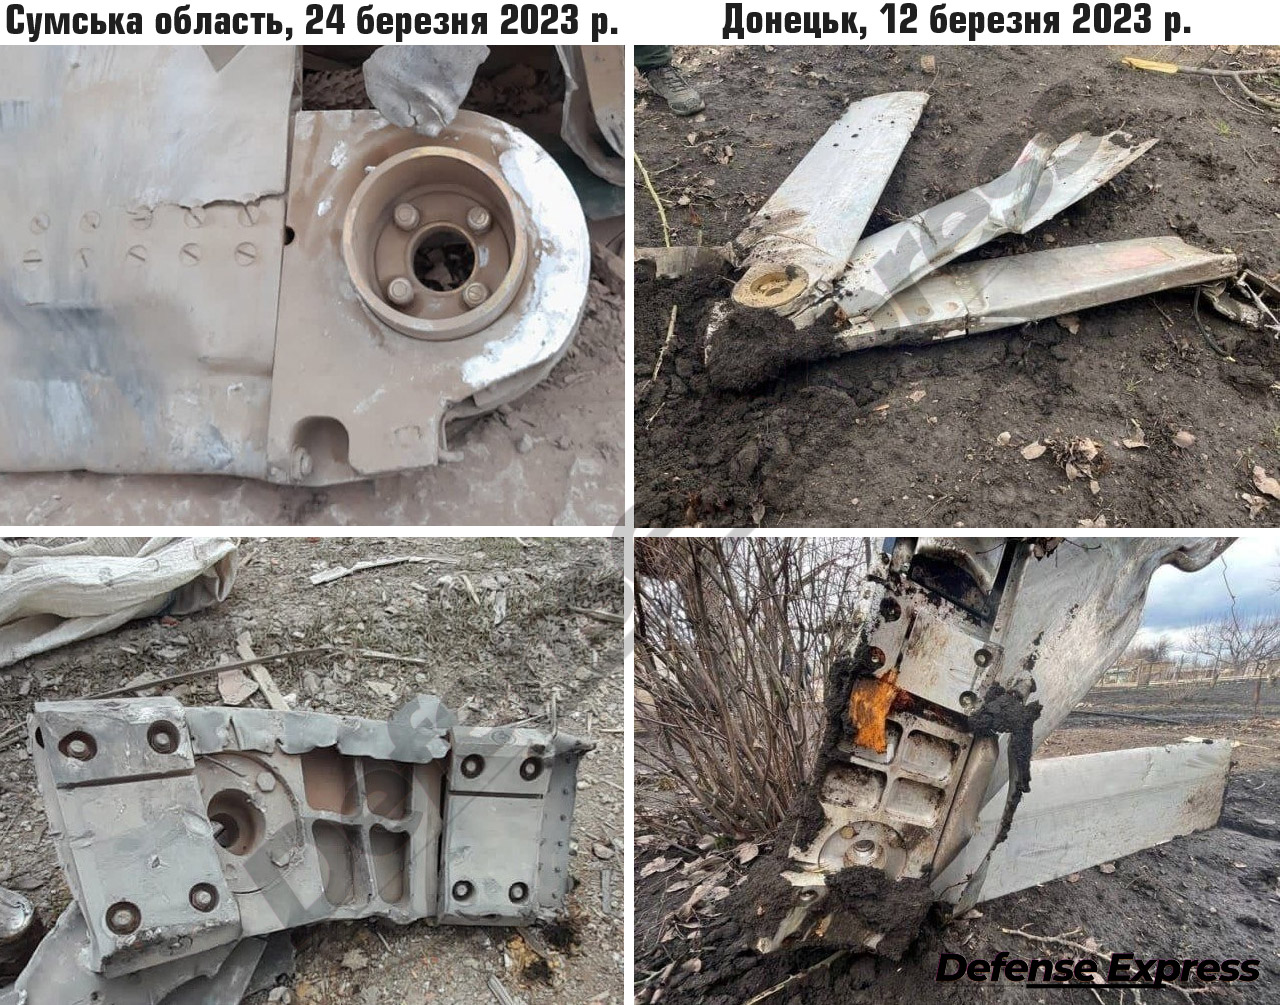 Russia used its JDAM-ER bomb kit analog to attack Sumy Oblast, wreckage  shows - Defense Express - Euromaidan Press